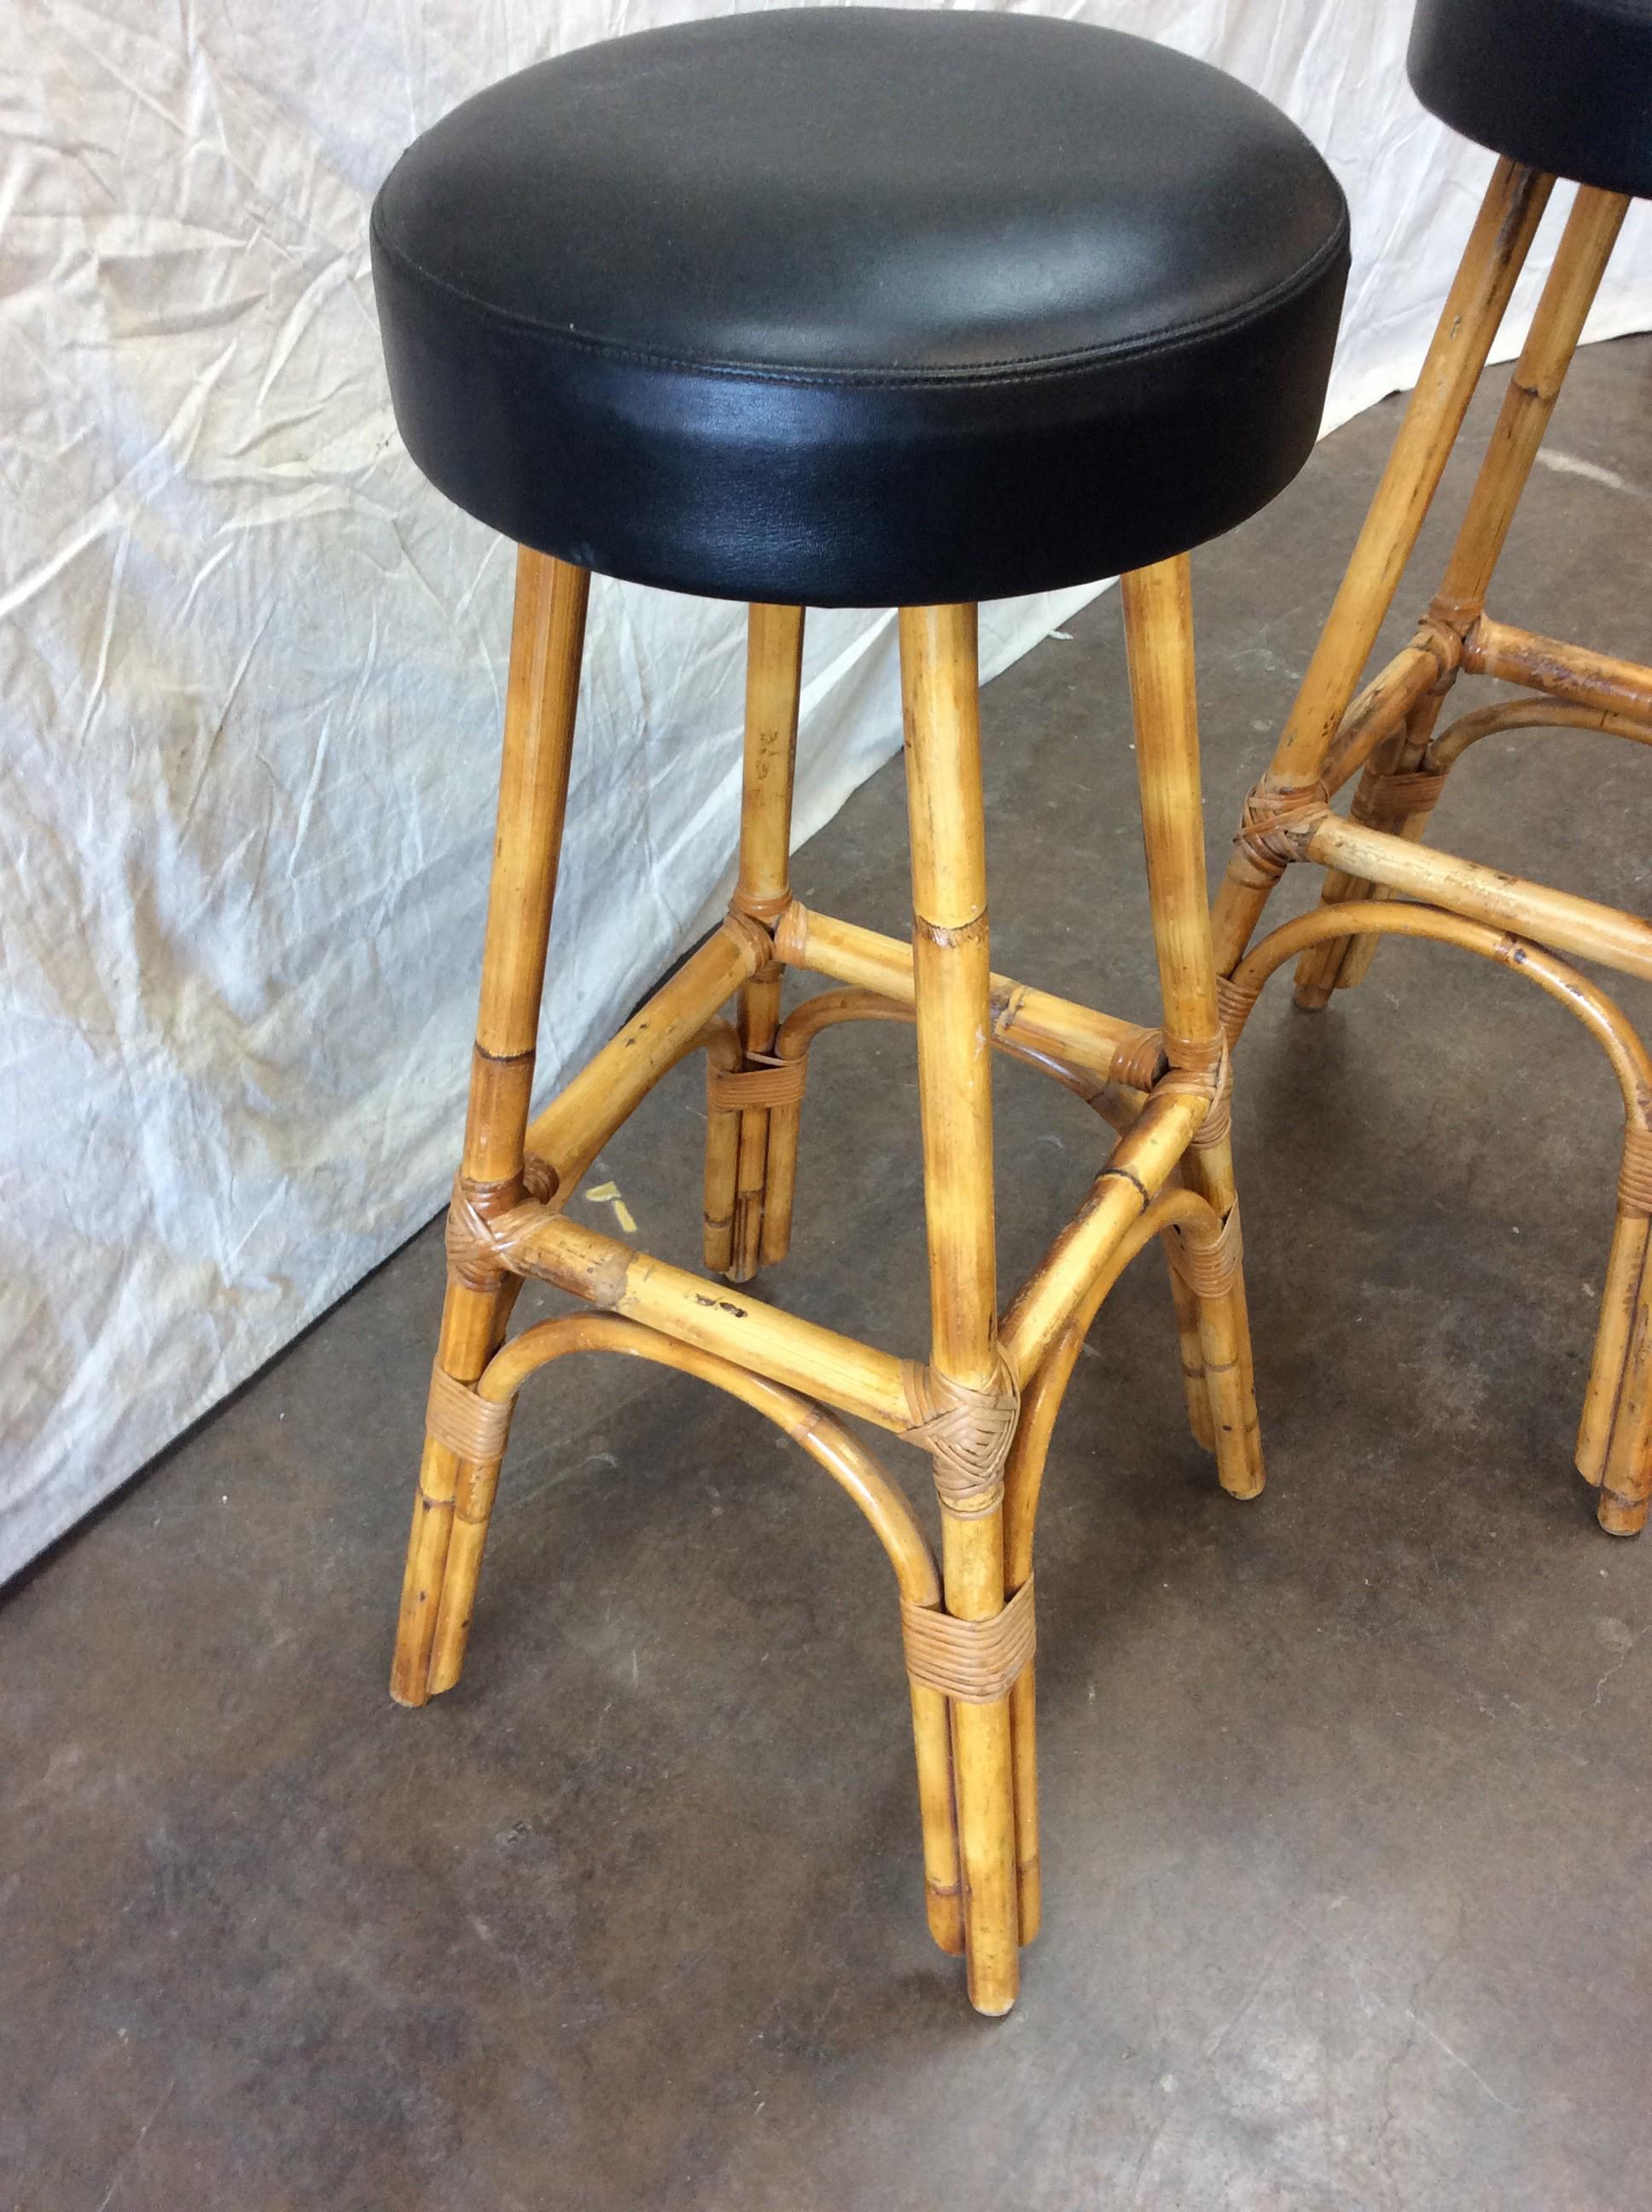 Hand-Crafted 1950s French Rattan and Bamboo Bar Stools - a Pair For Sale